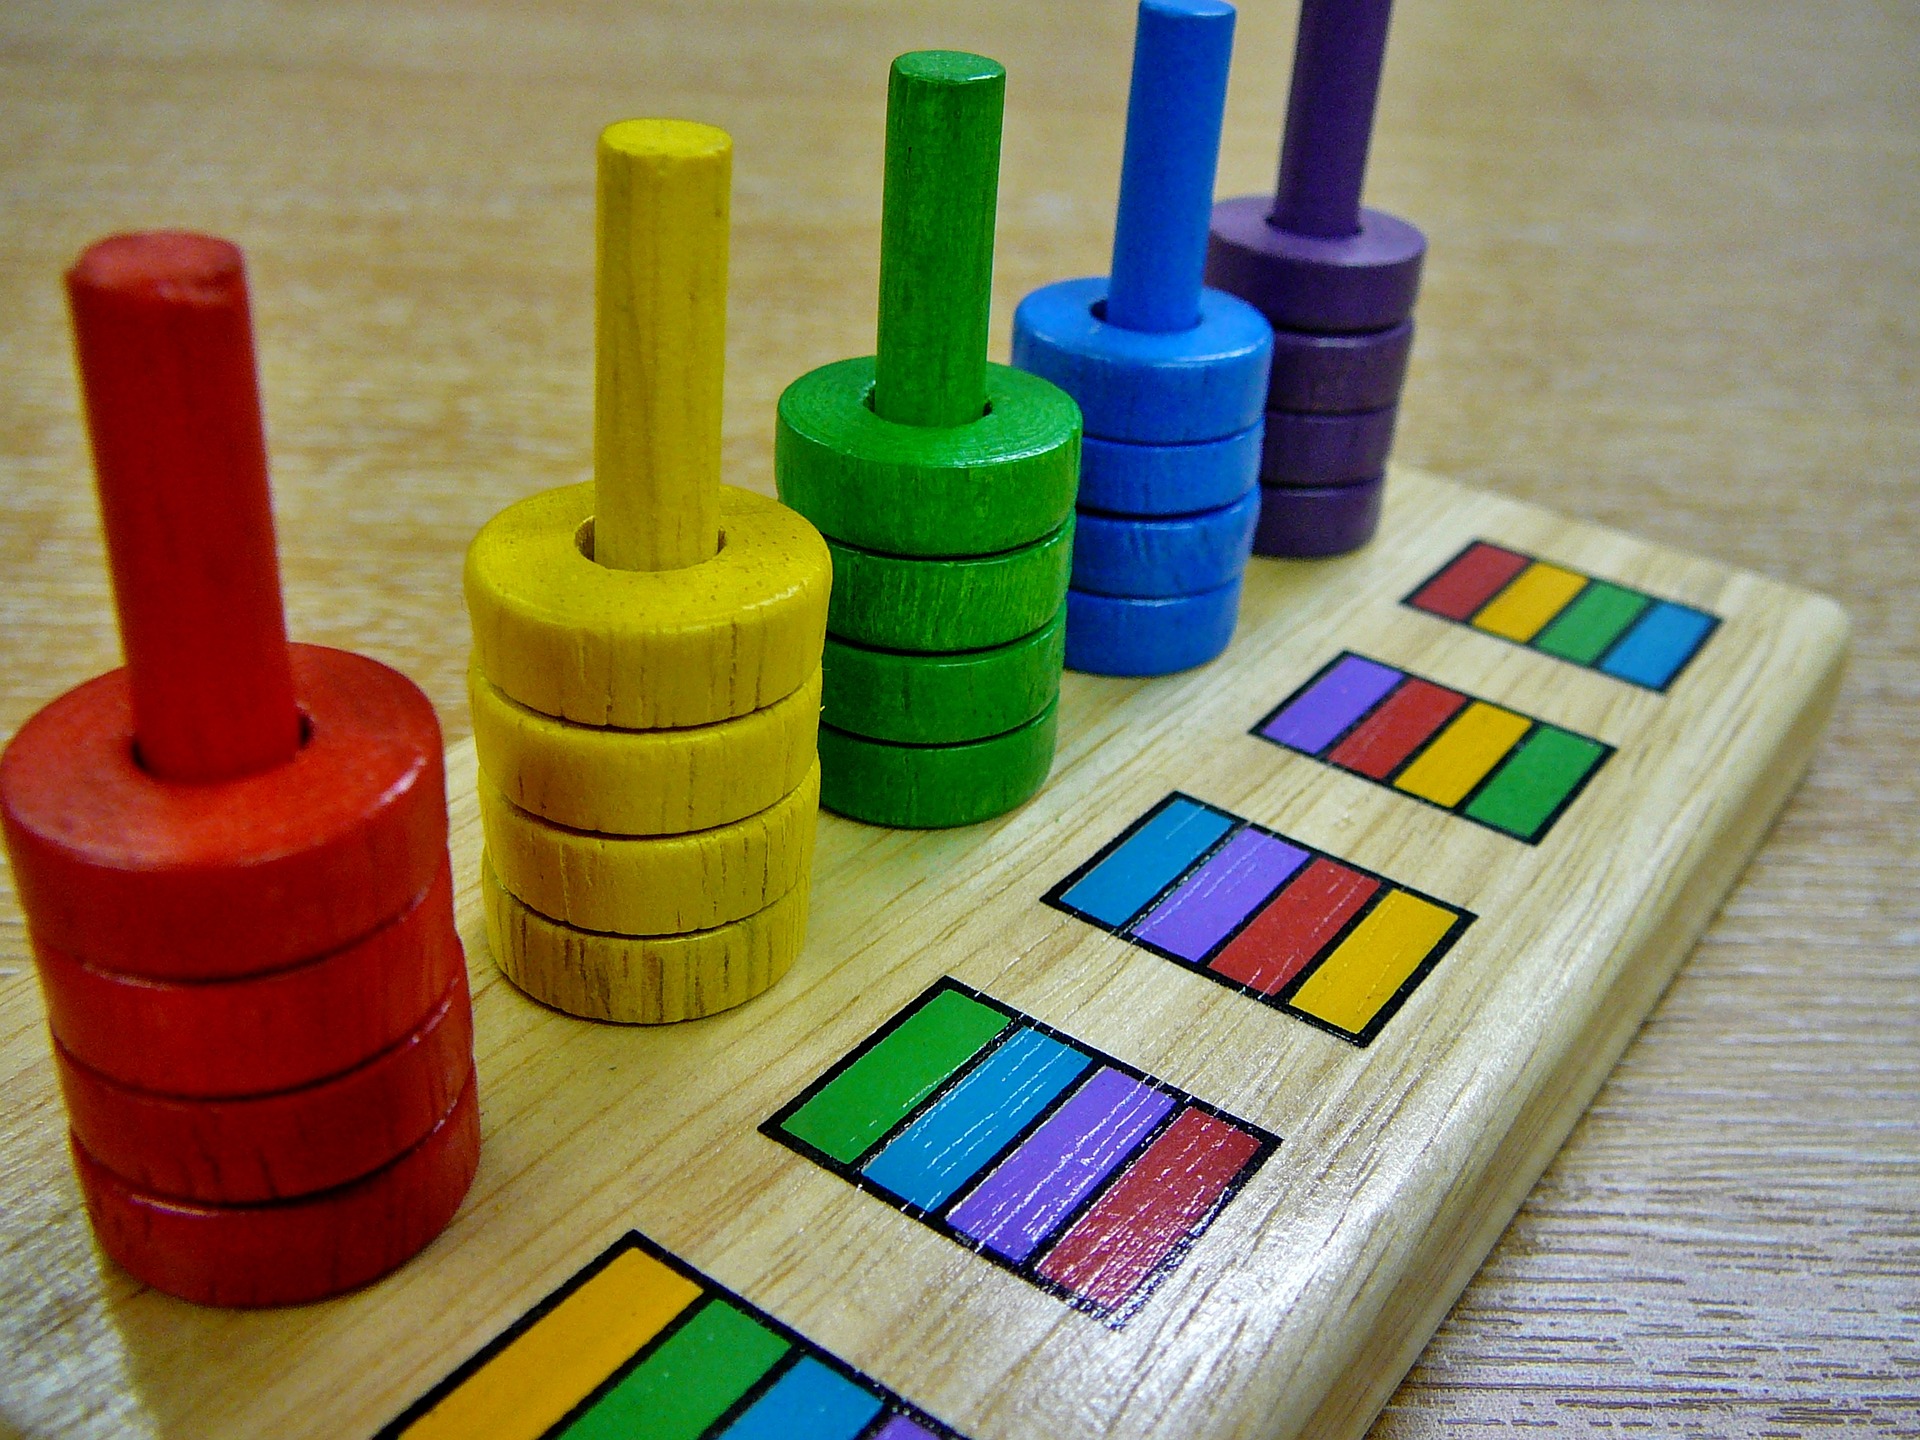 Colored stacking disks logic puzzle